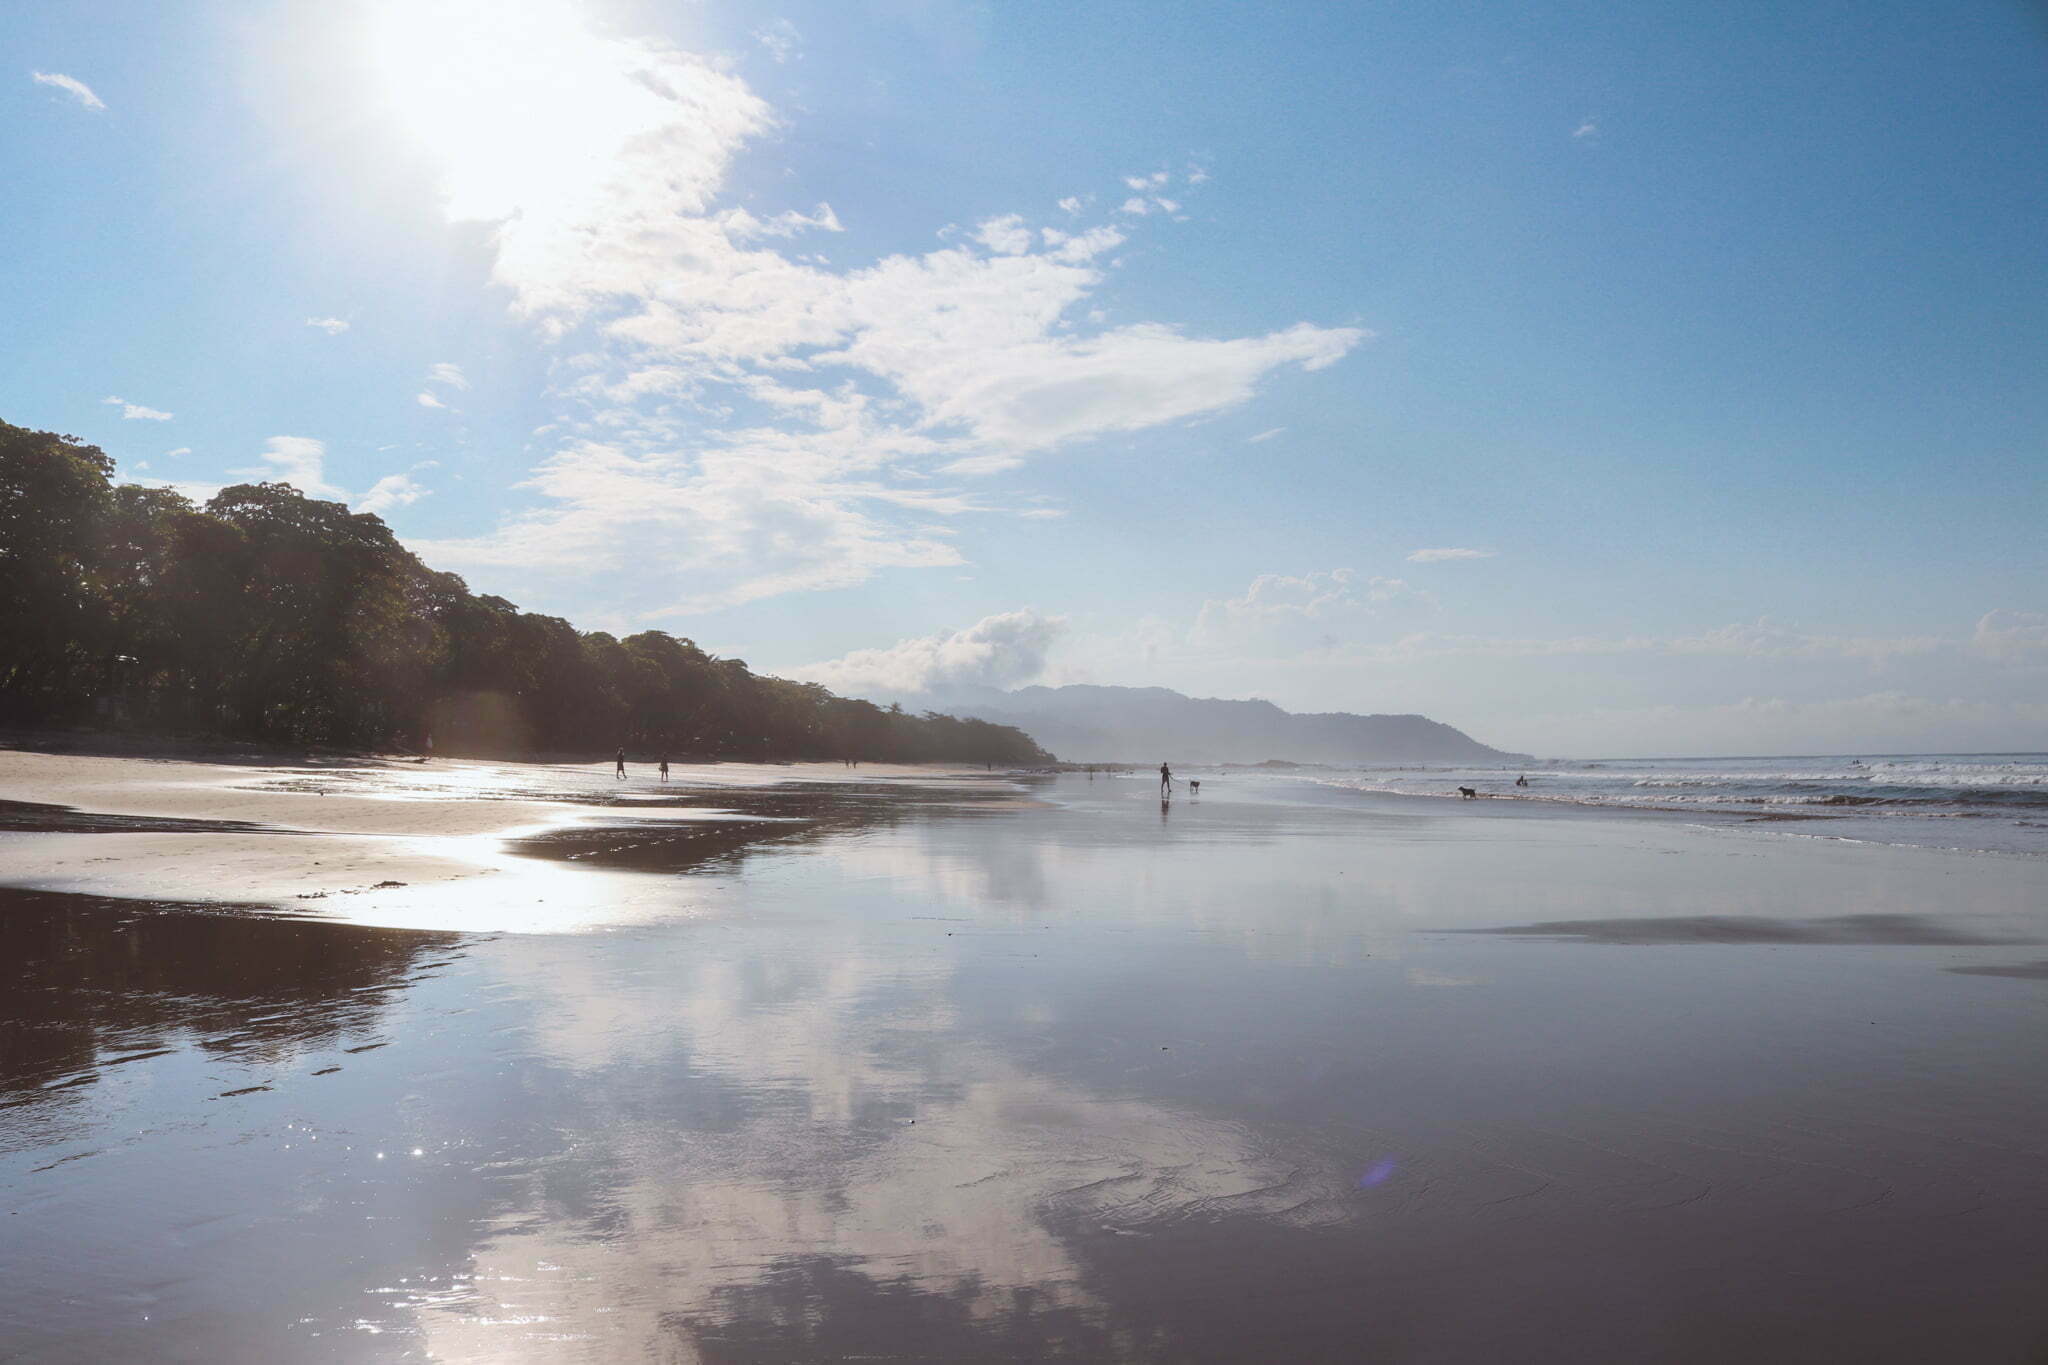 Santa Teresa is one of the best beach towns in Costa Rica